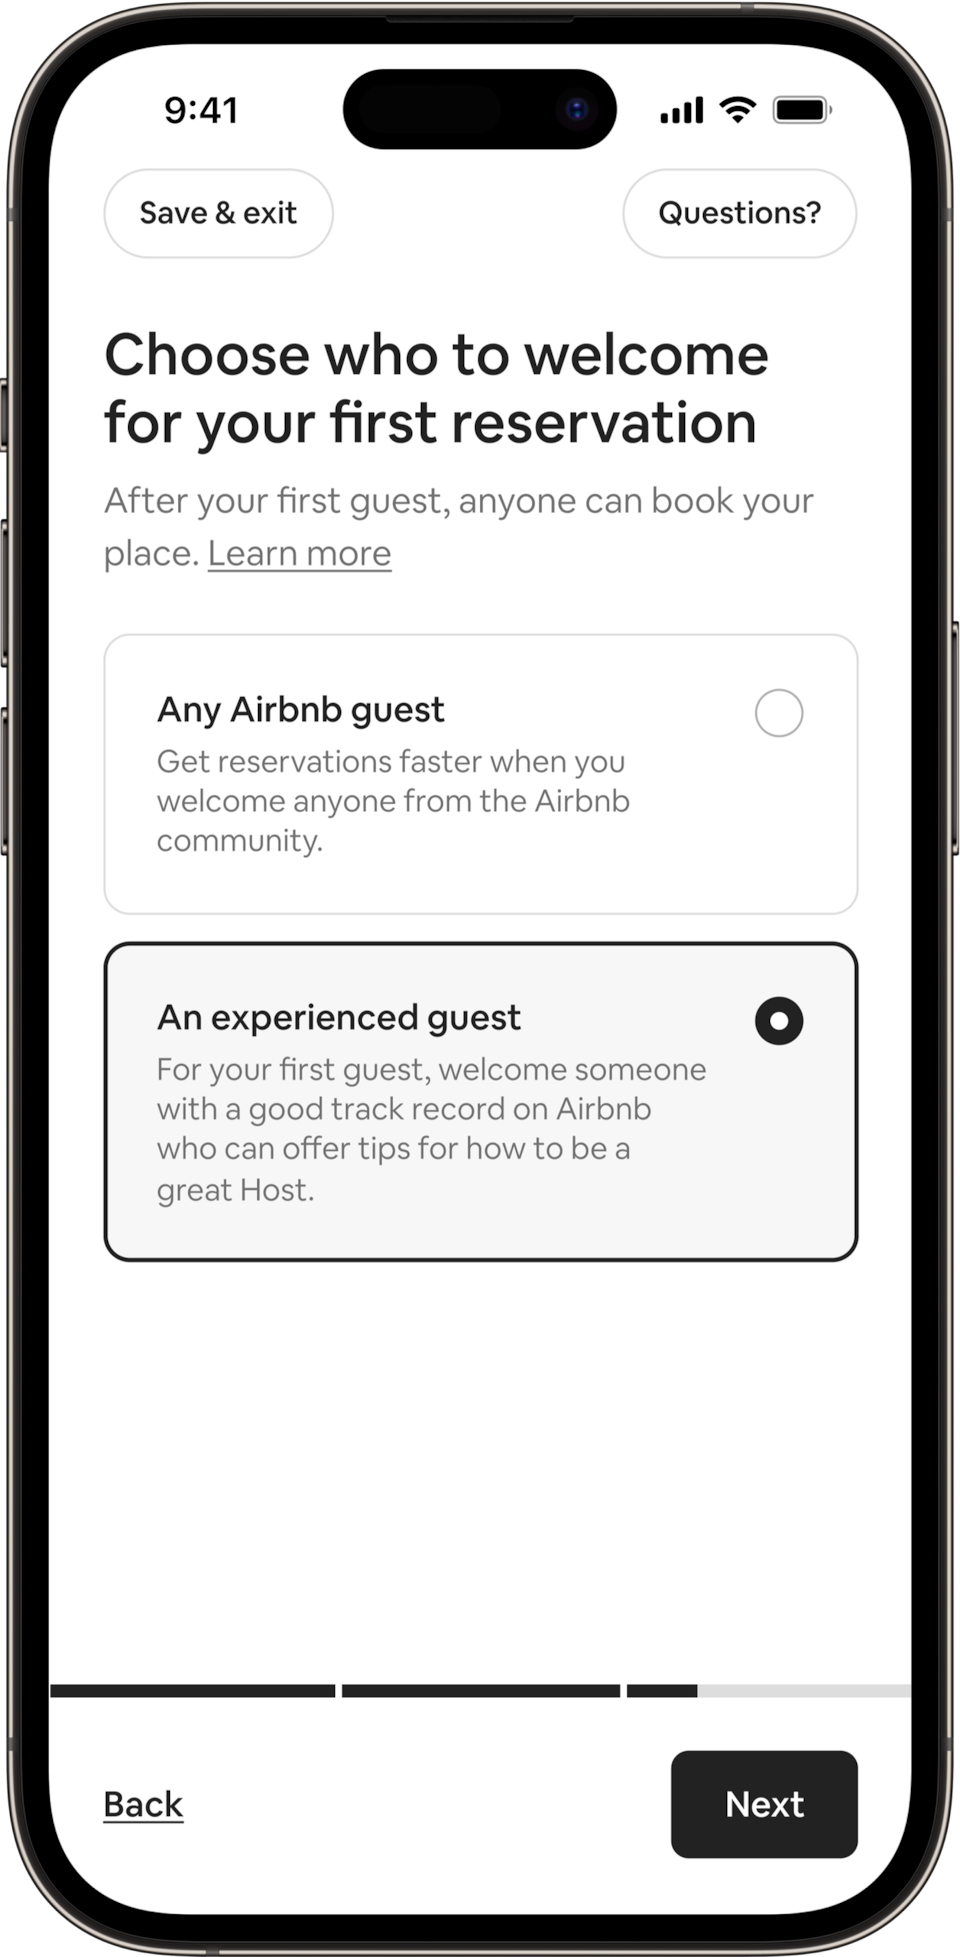 A phone shows a title saying: Choose who to welcome for your first reservation. Hosts can either opt to welcome any Airbnb guest, or they can opt to welcome an experienced guest. The experienced guest button has been selected.